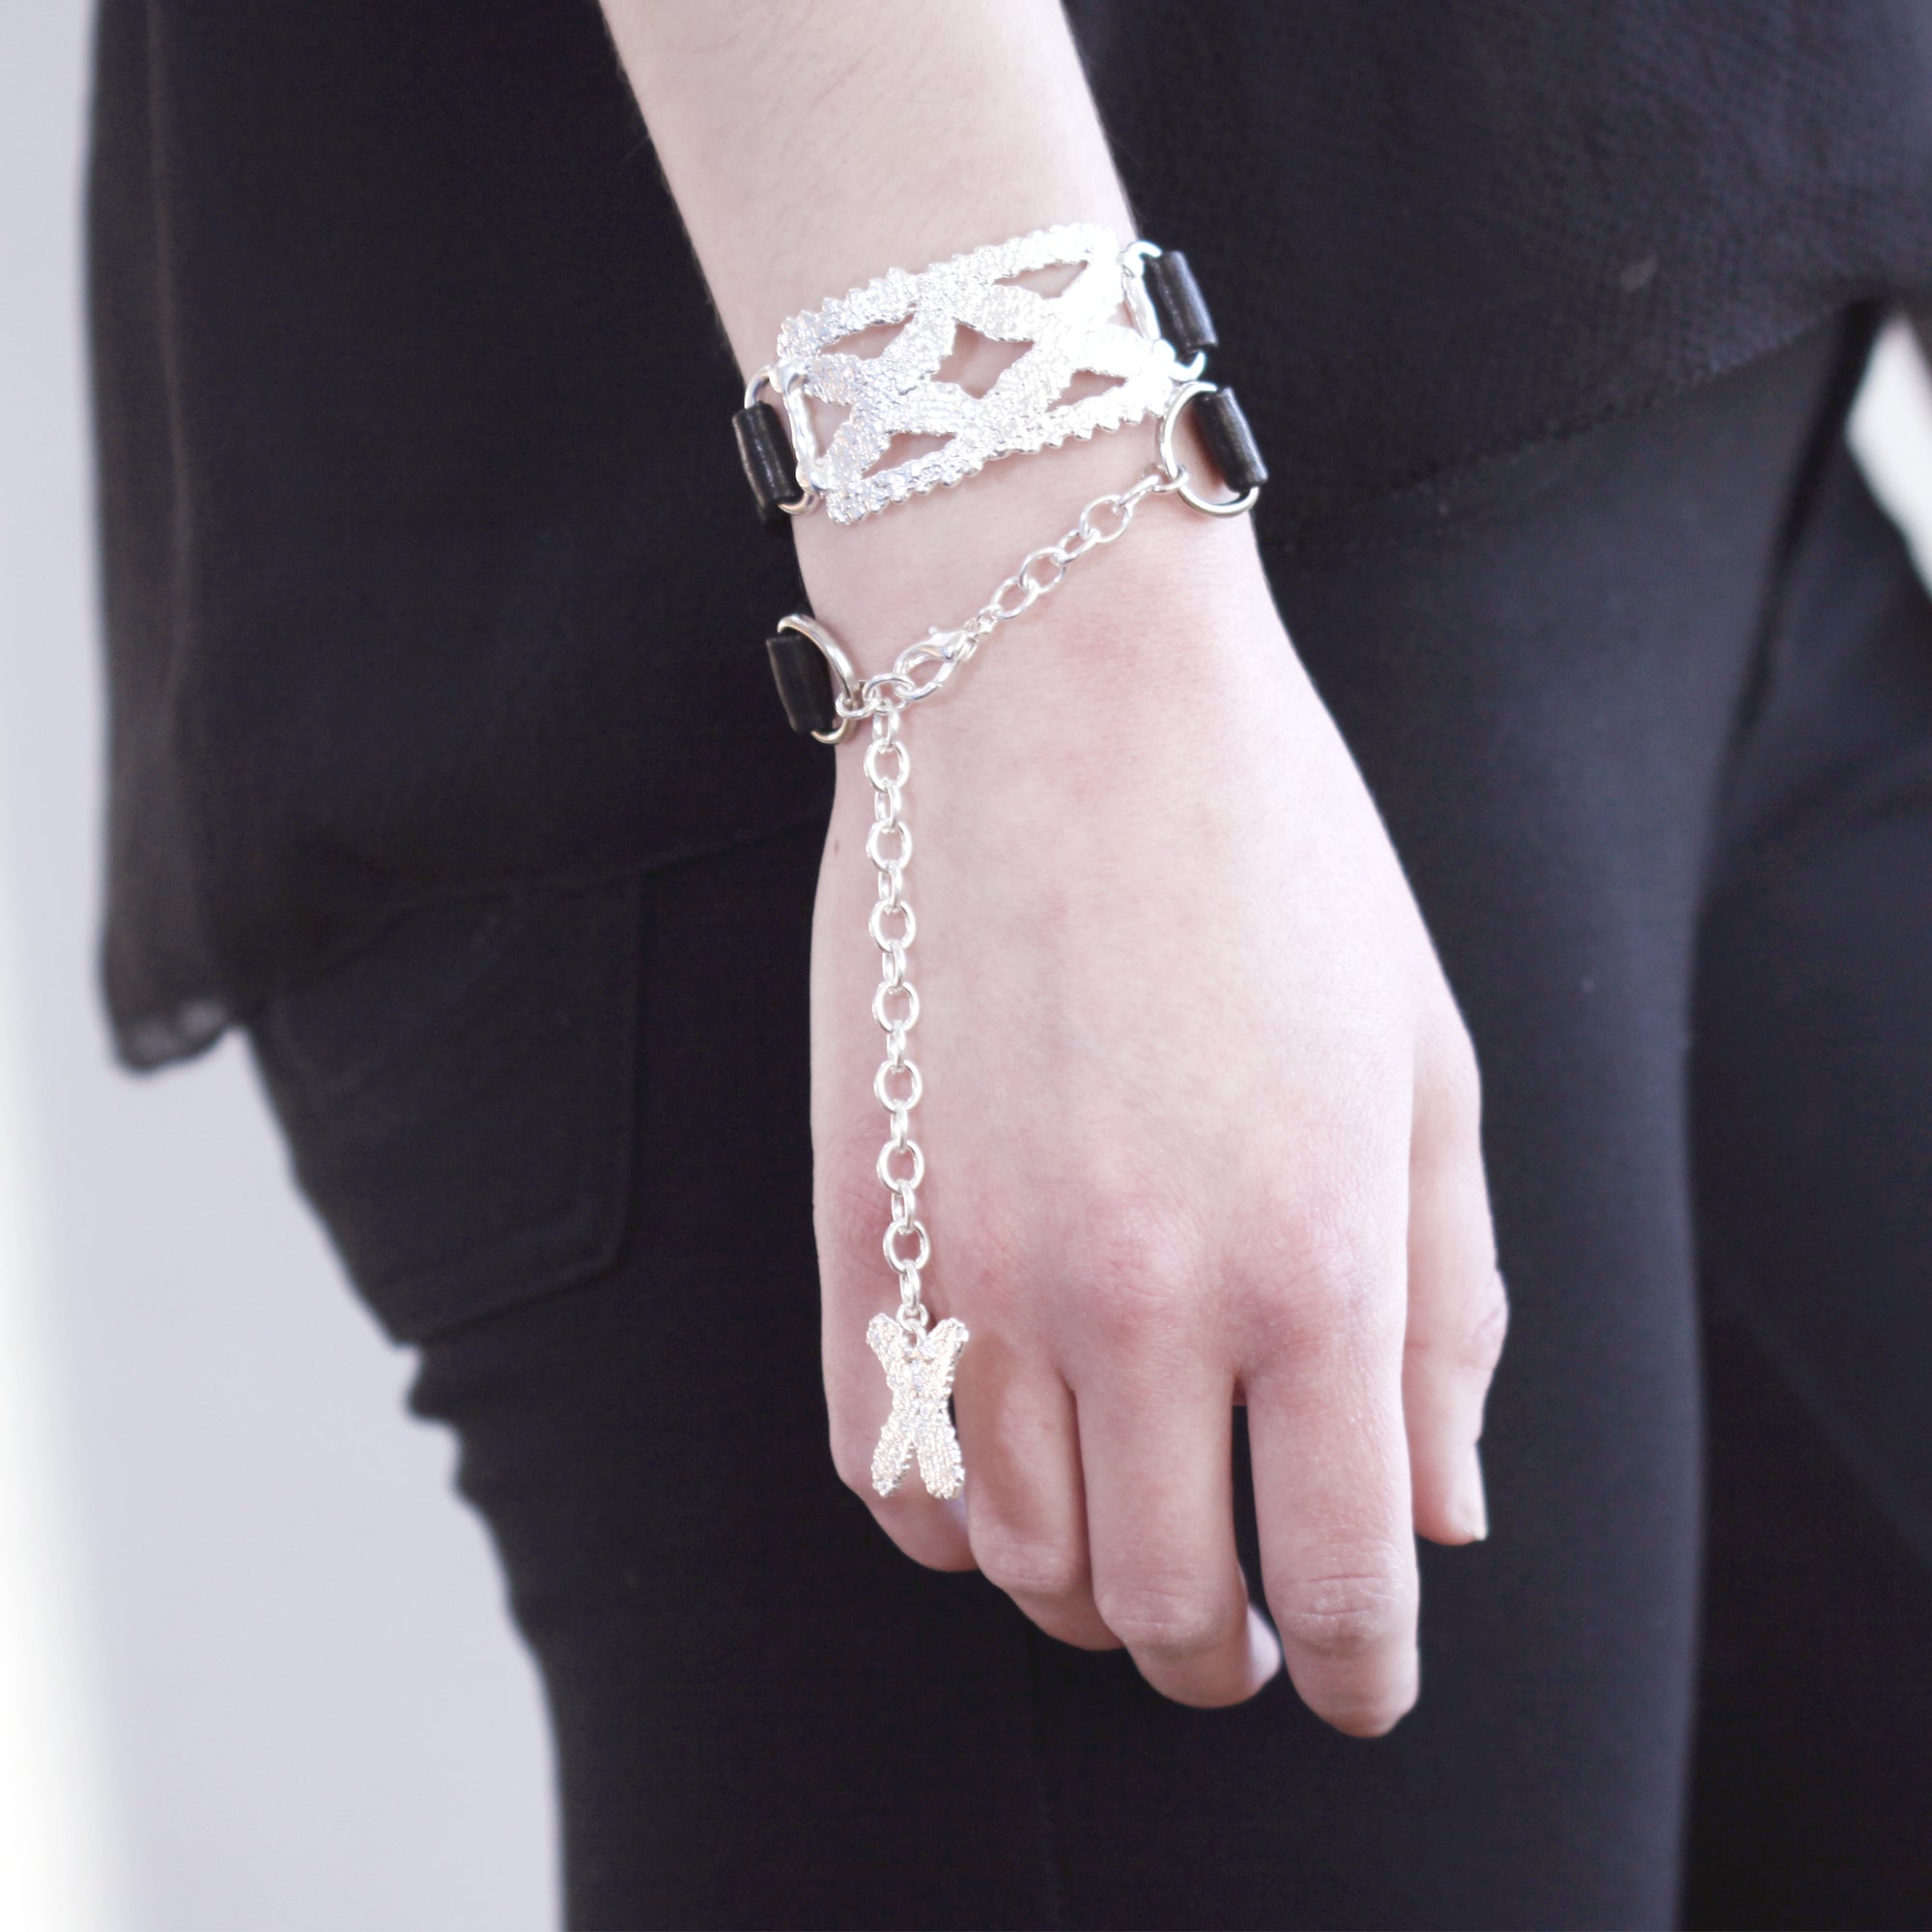 Leather and Lace Wrap Bracelet in sterling silver.